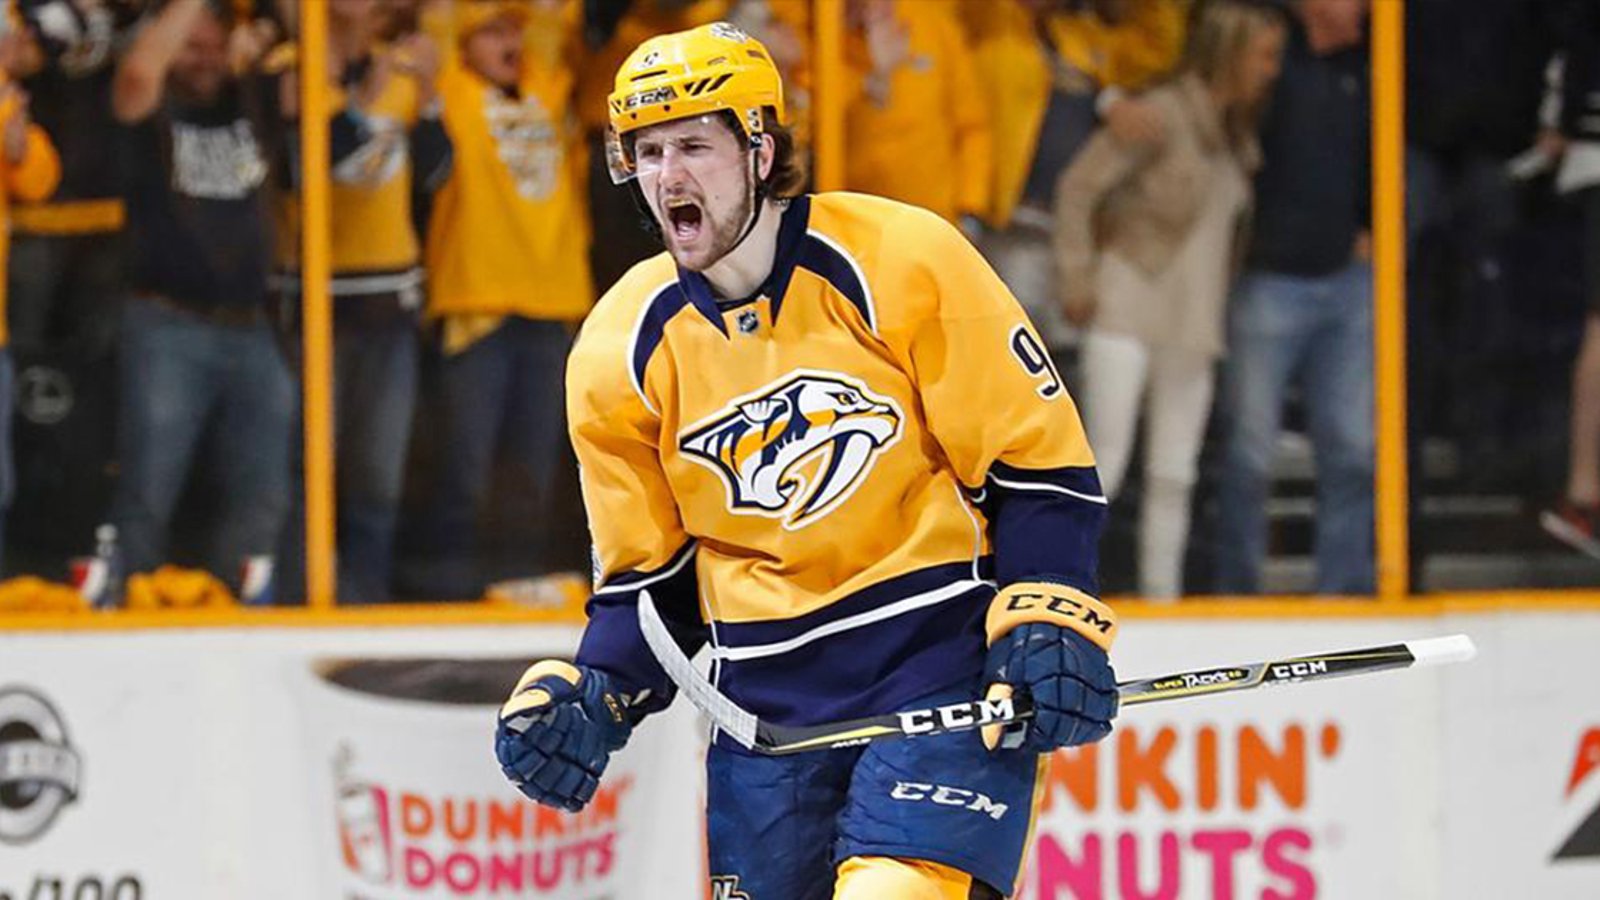 Report: The worst is confirmed for Forsberg and the Preds